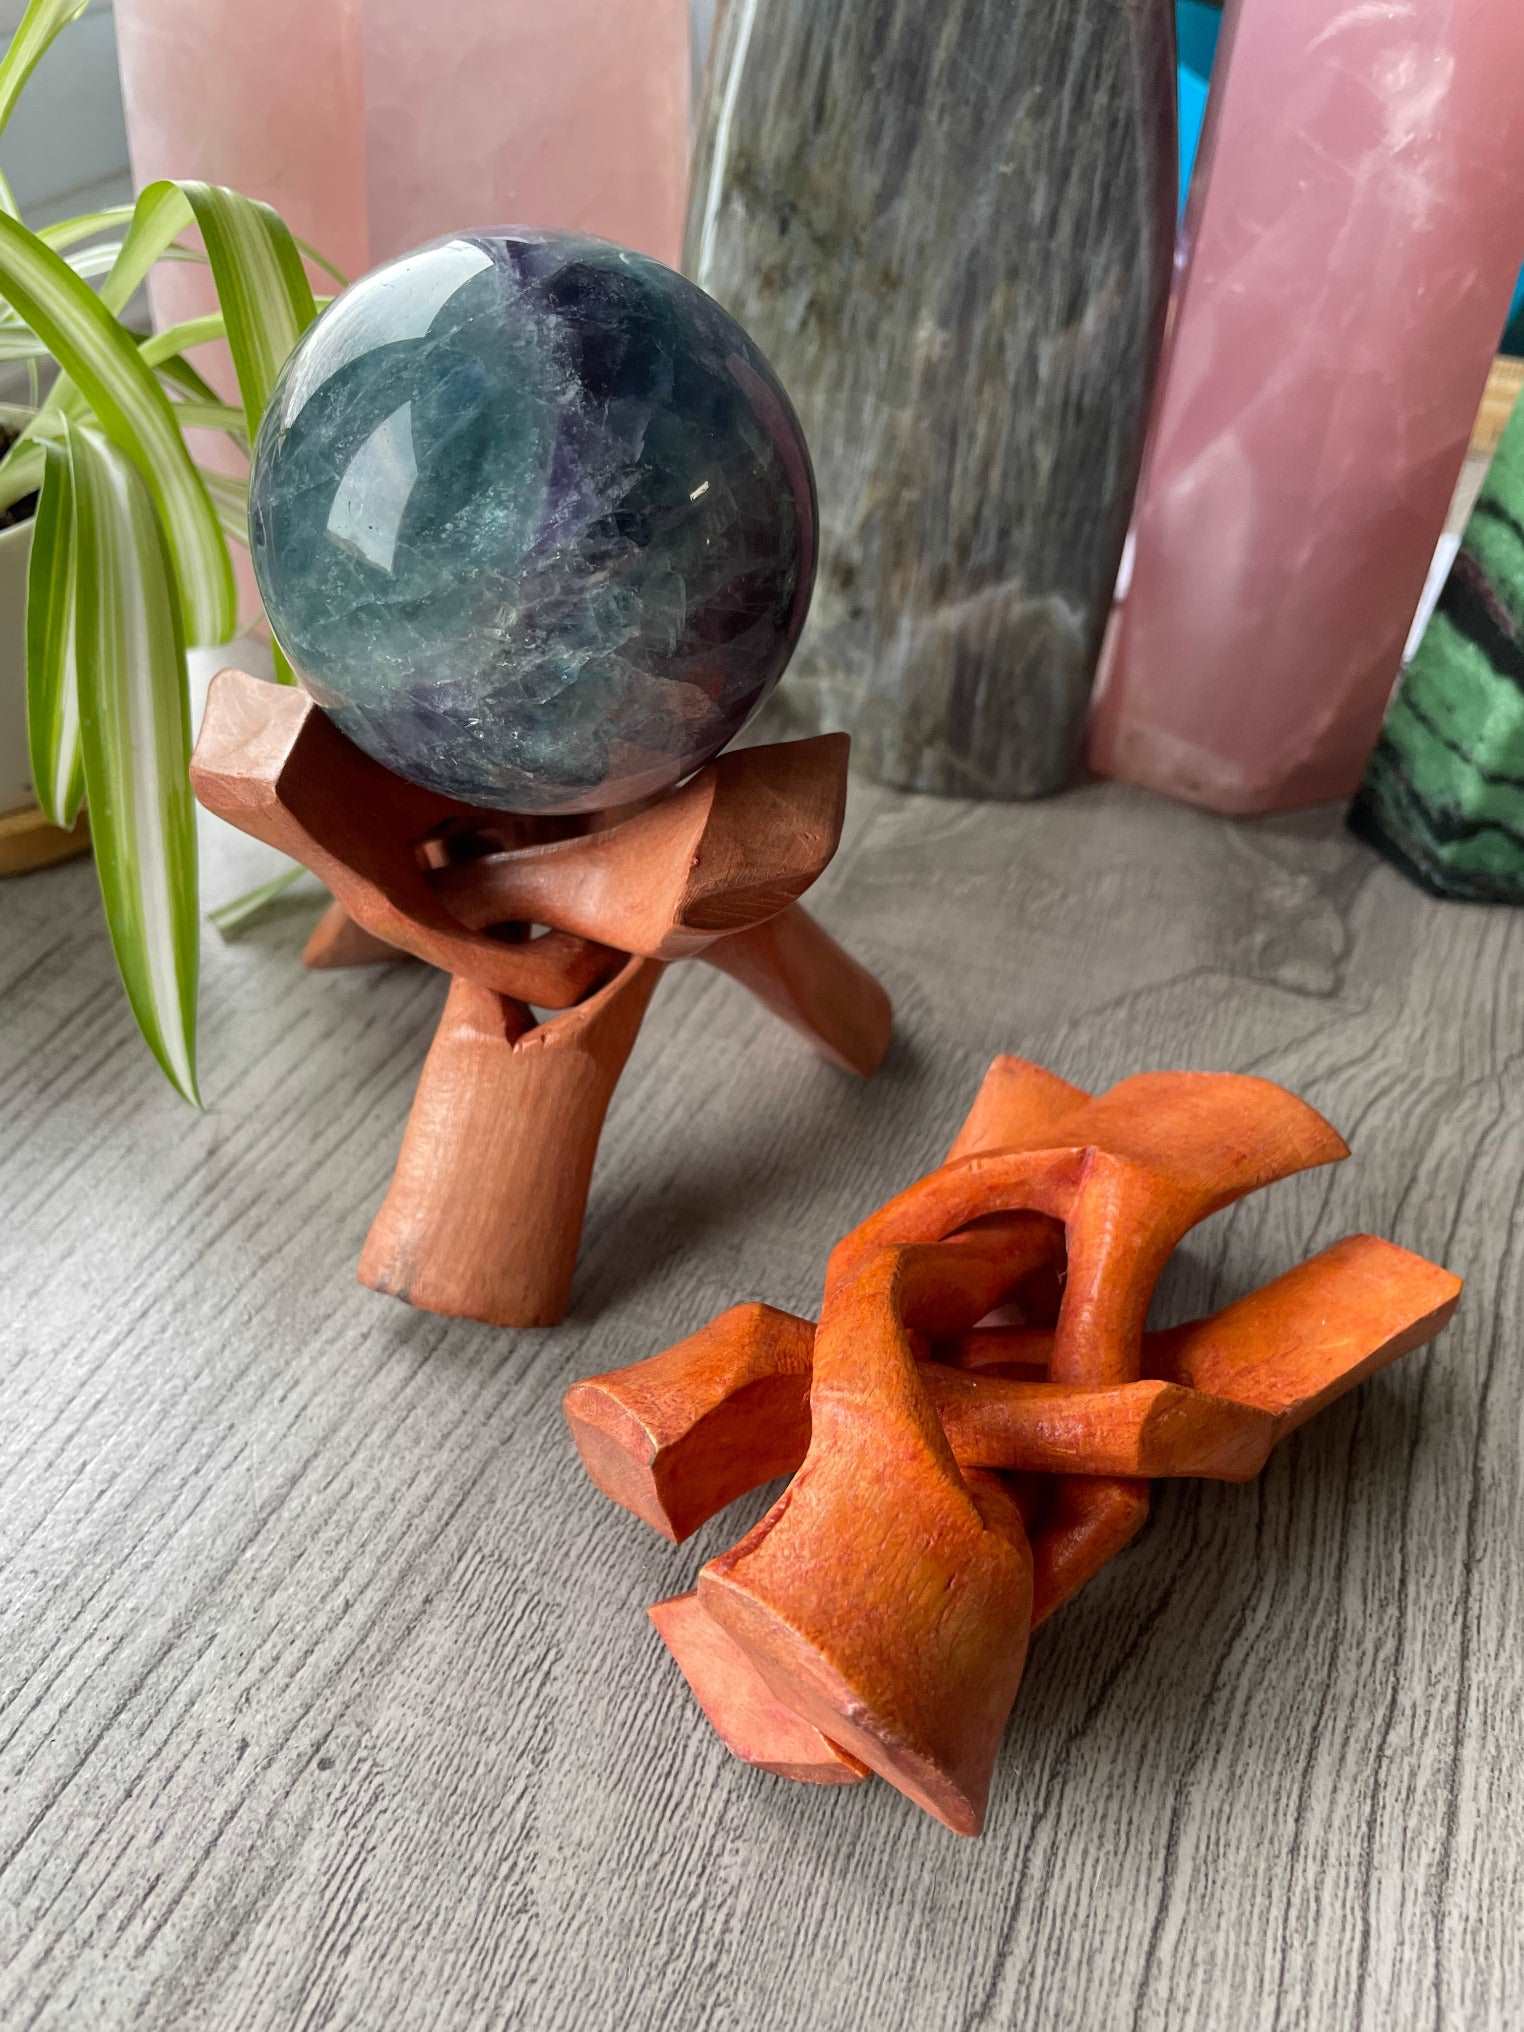 Pictured is a wood sphere stand.